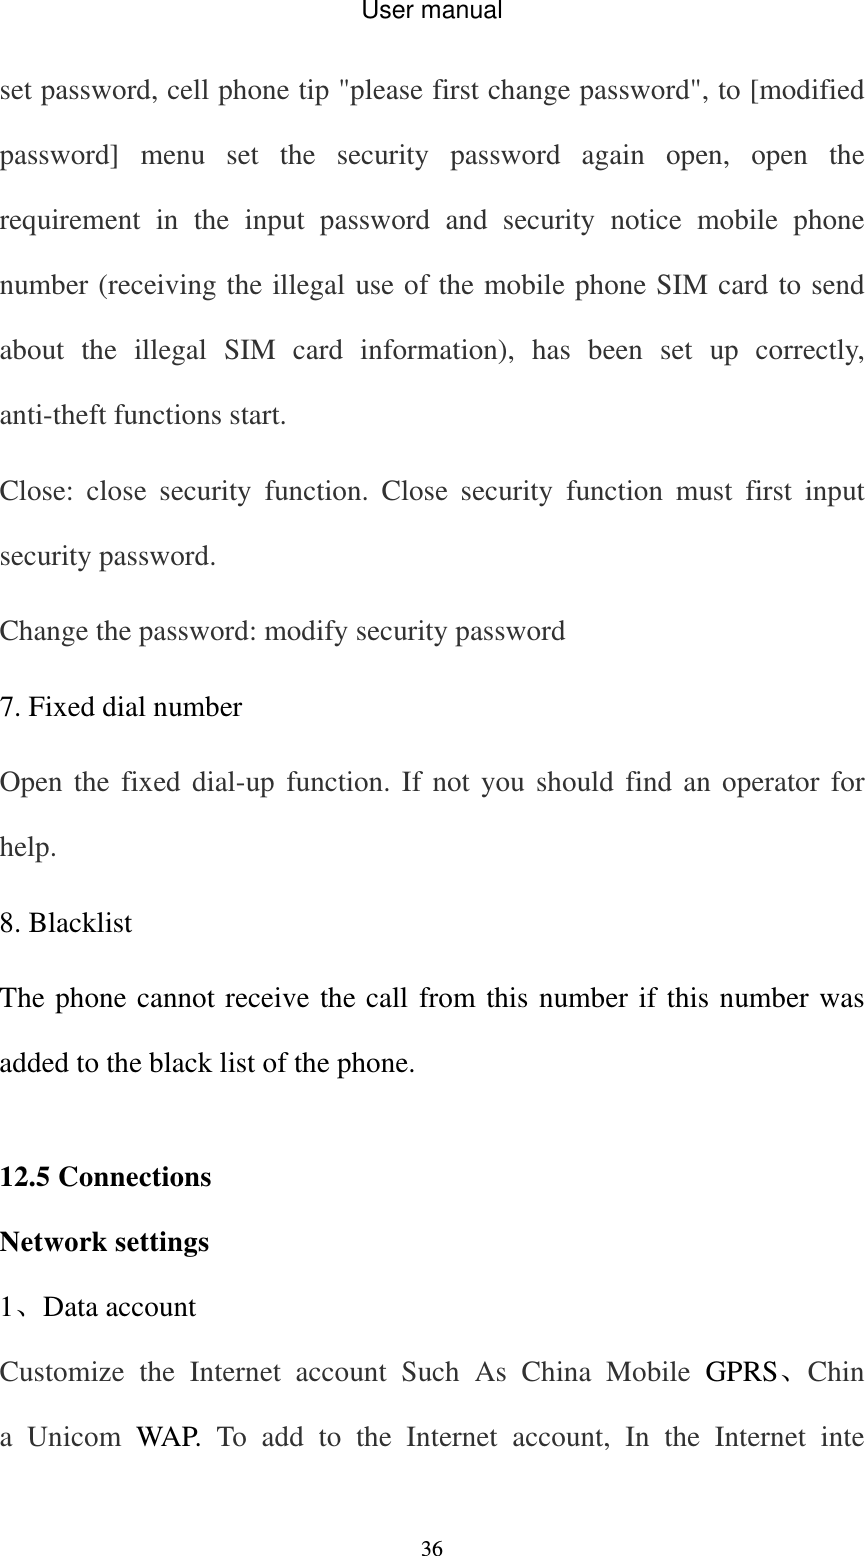 User manual  36set password, cell phone tip &quot;please first change password&quot;, to [modified password] menu set the security password again open, open the requirement in the input password and security notice mobile phone number (receiving the illegal use of the mobile phone SIM card to send about the illegal SIM card information), has been set up correctly, anti-theft functions start. Close: close security function. Close security function must first input security password.   Change the password: modify security password 7. Fixed dial number Open the fixed dial-up function. If not you should find an operator for help. 8. Blacklist The phone cannot receive the call from this number if this number was added to the black list of the phone.  12.5 Connections Network settings 1、Data account Customize the Internet account Such As China Mobile GPRS、China Unicom WAP. To add to the Internet account, In the Internet inte